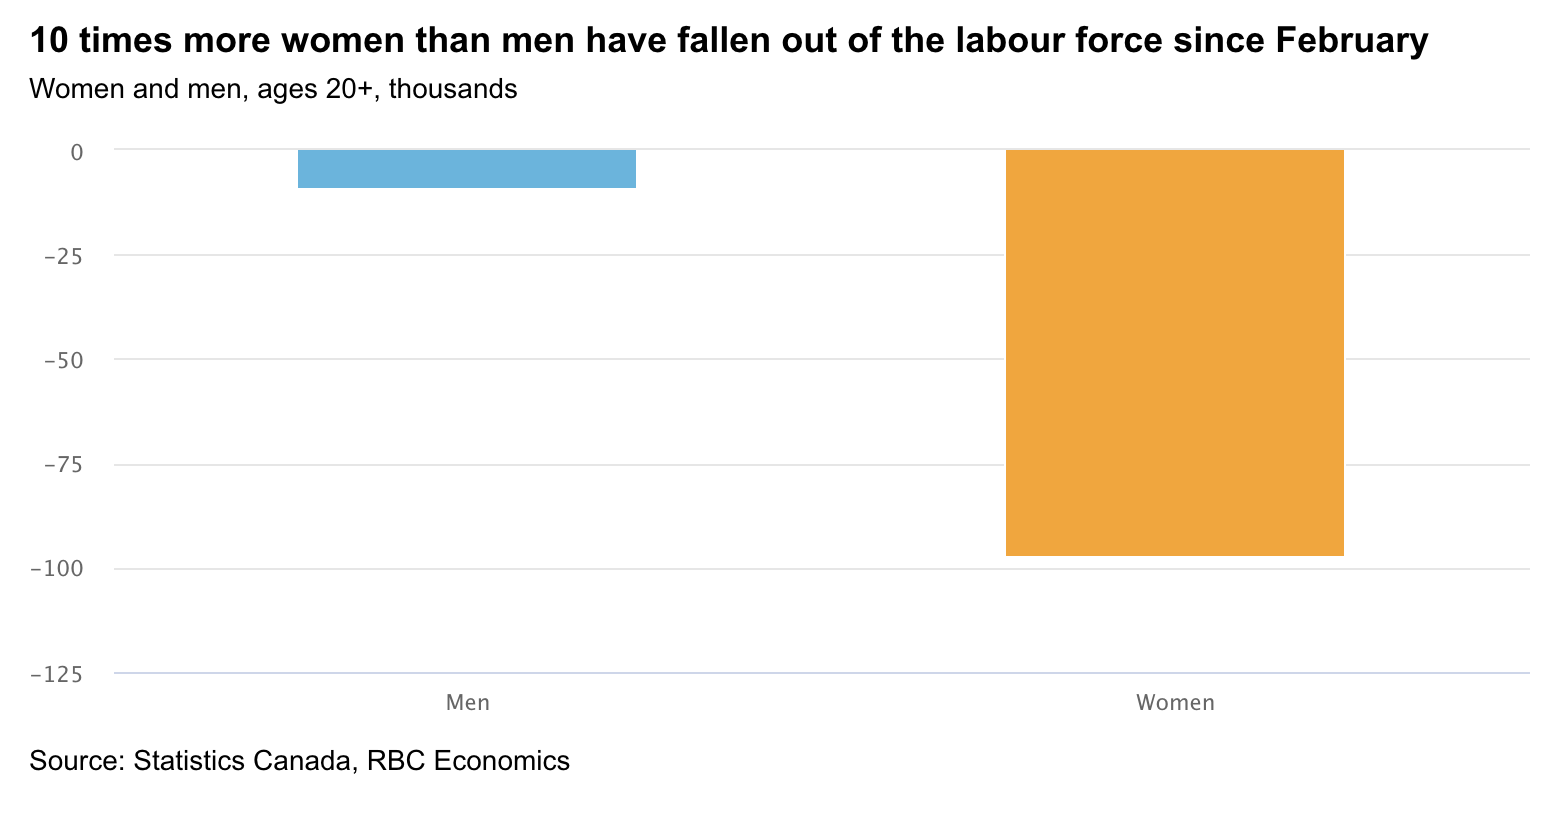 Chart showing 10 times more women have fallen out of labour force since February